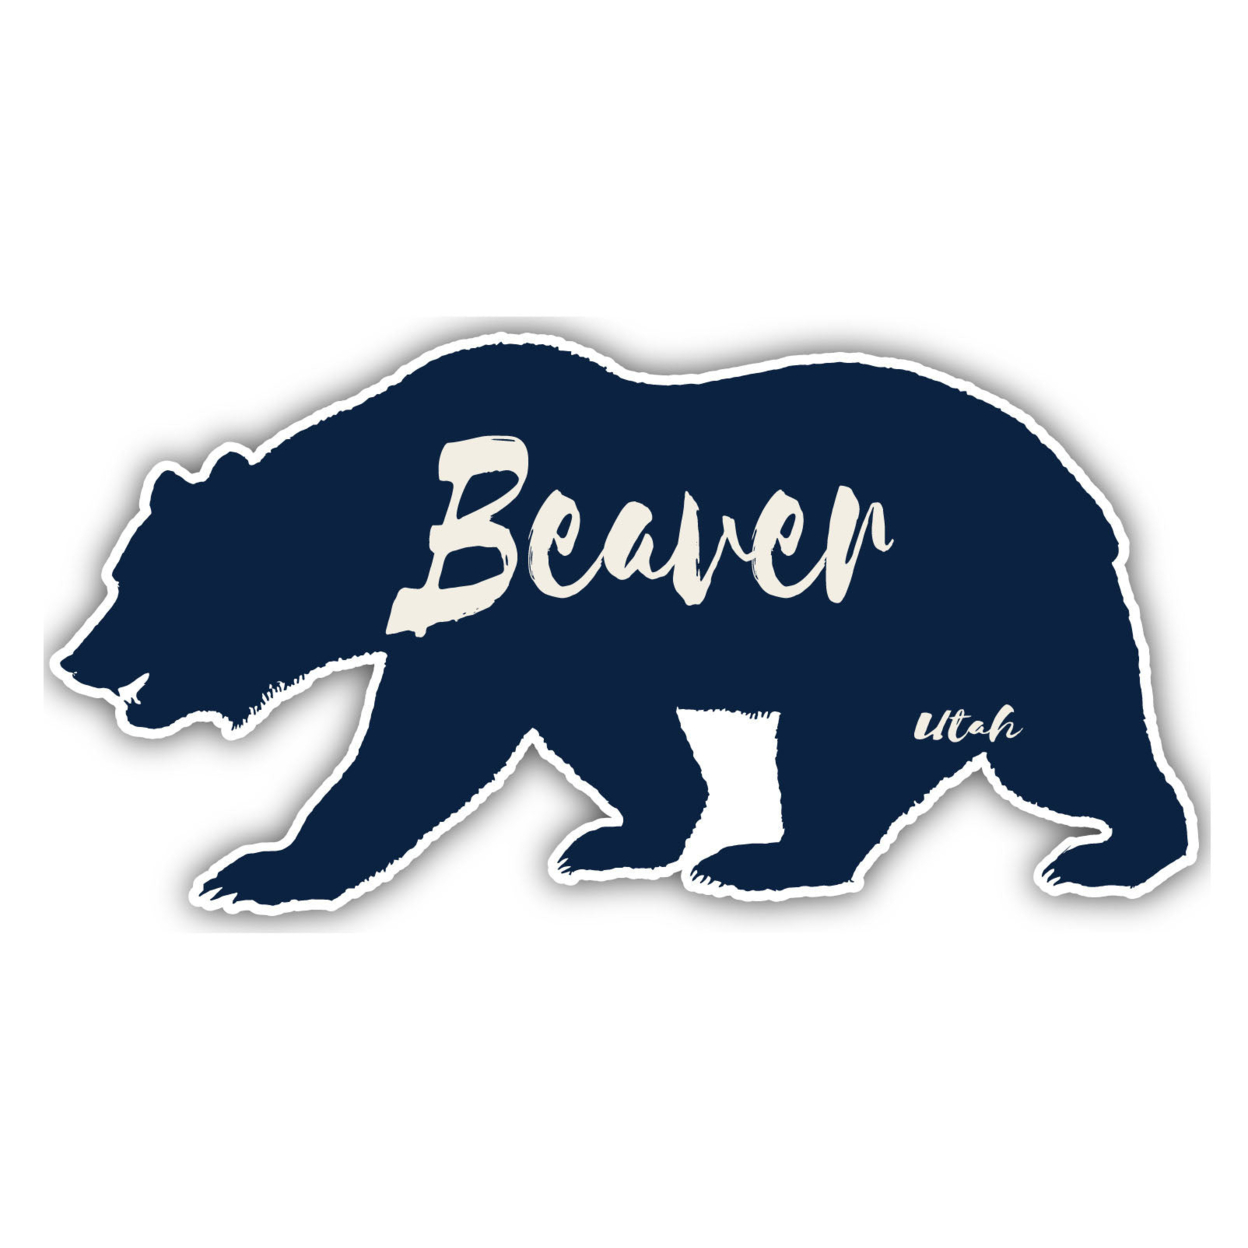 Beaver Utah Souvenir Decorative Stickers (Choose Theme And Size) - 4-Pack, 6-Inch, Tent